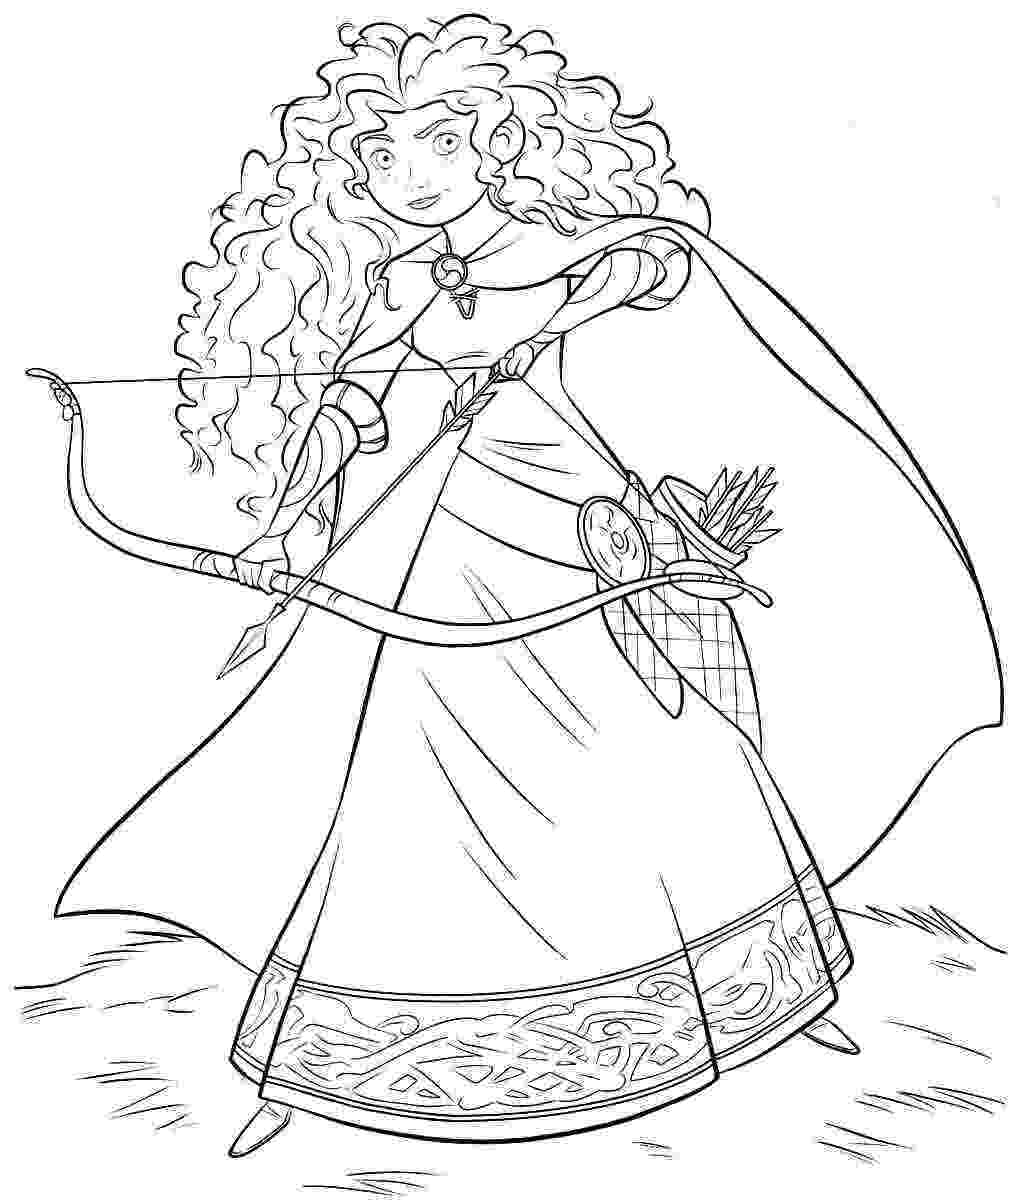 free coloring pages of all the disney princesses disney princess coloring pages minister coloring of coloring free all disney pages princesses the 